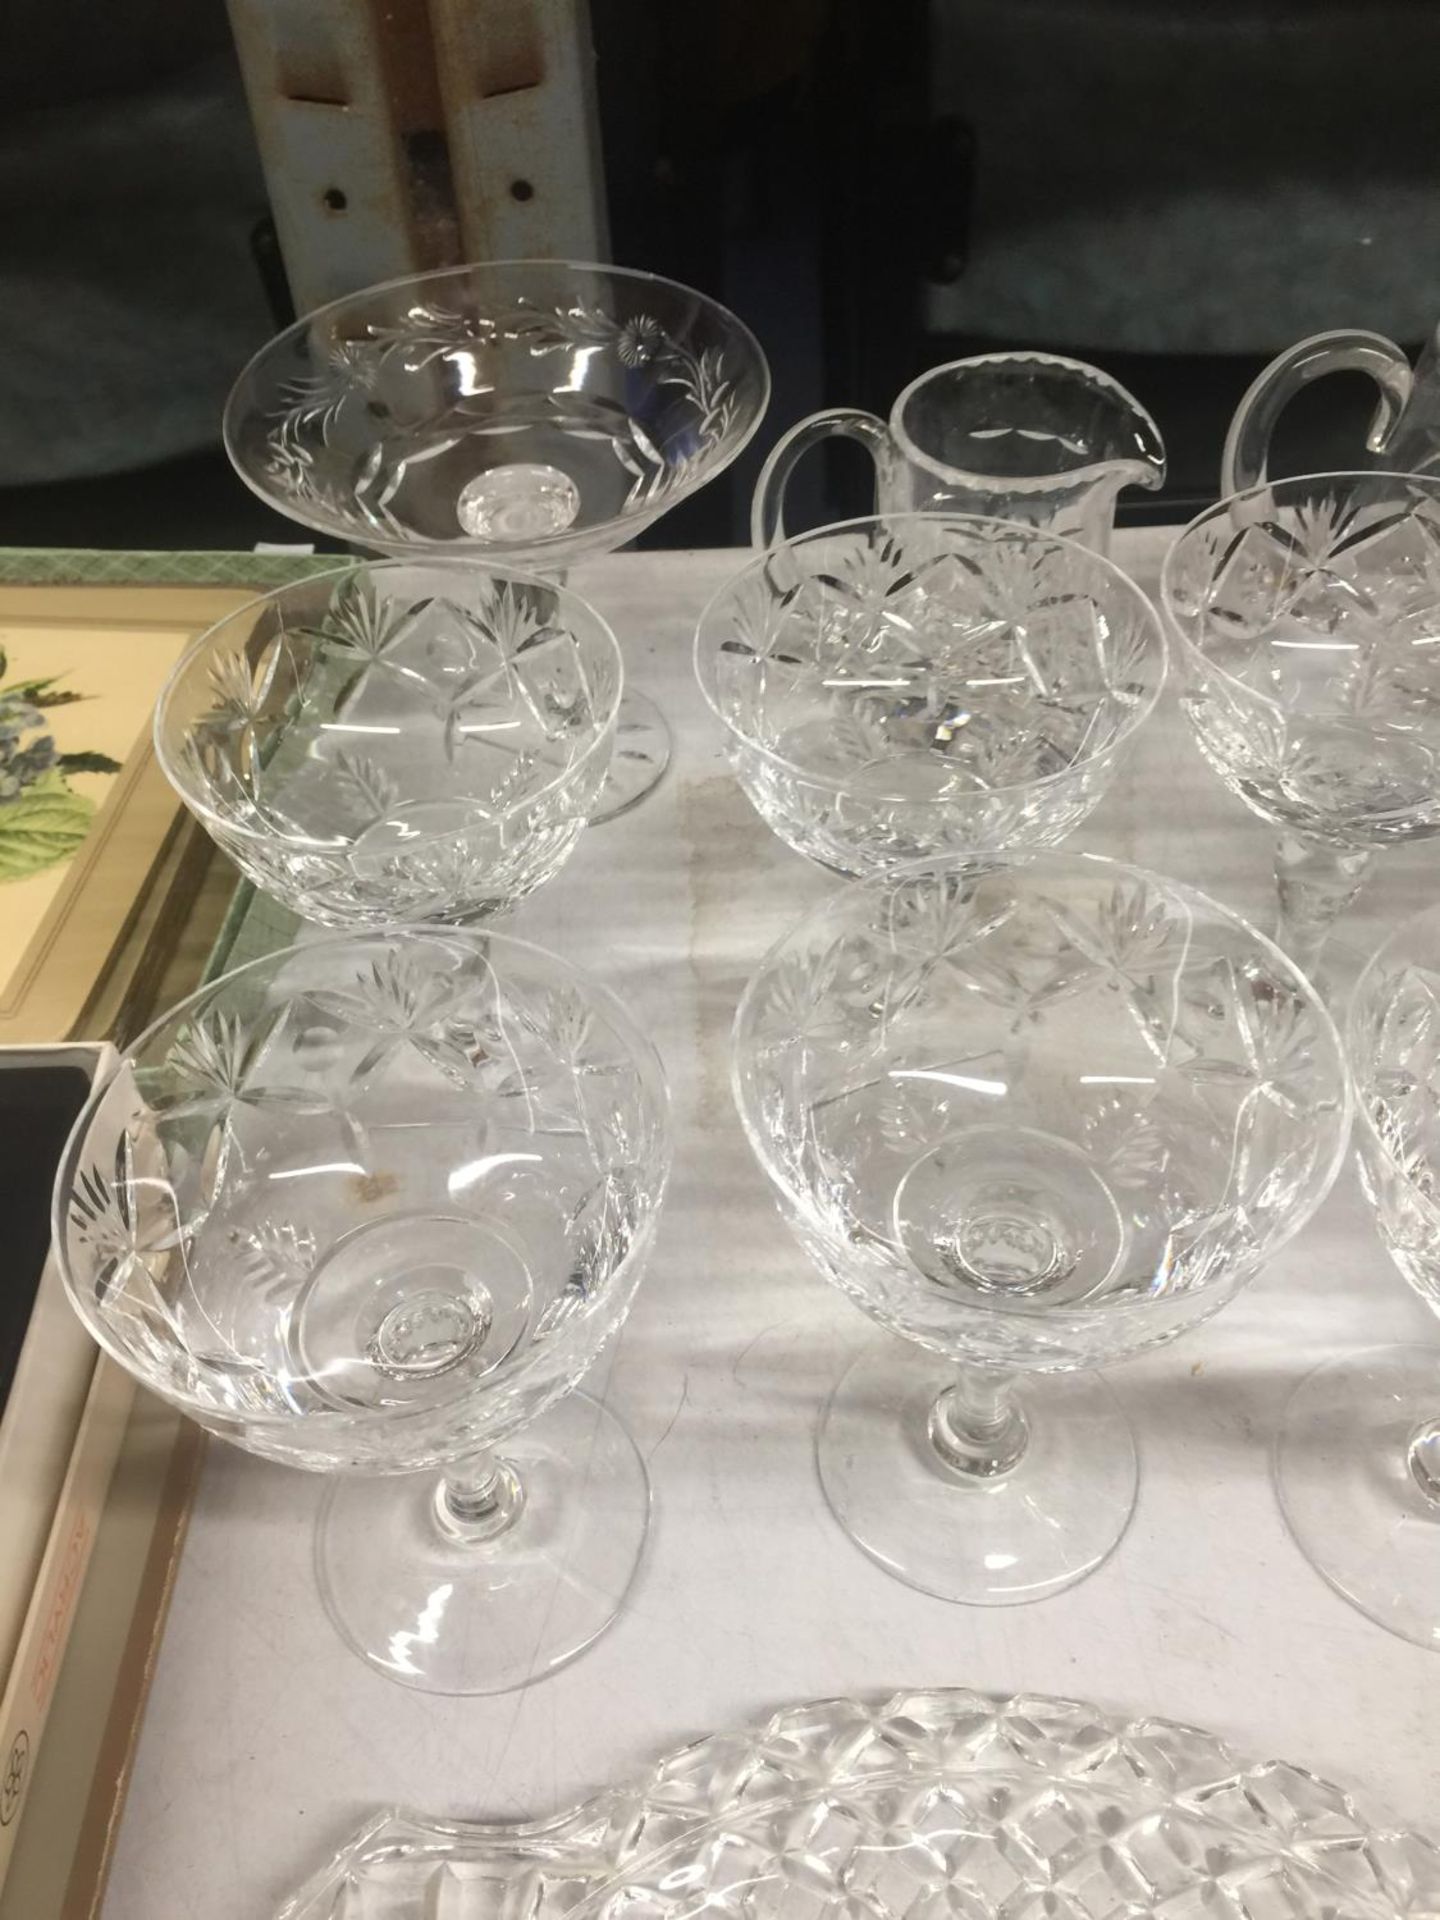 A QUANTITY OF GLASSWARE TO INCLUDE DESSERT BOWLS, SUGAR BOWLS, JUGS AND TRAY - Image 2 of 3